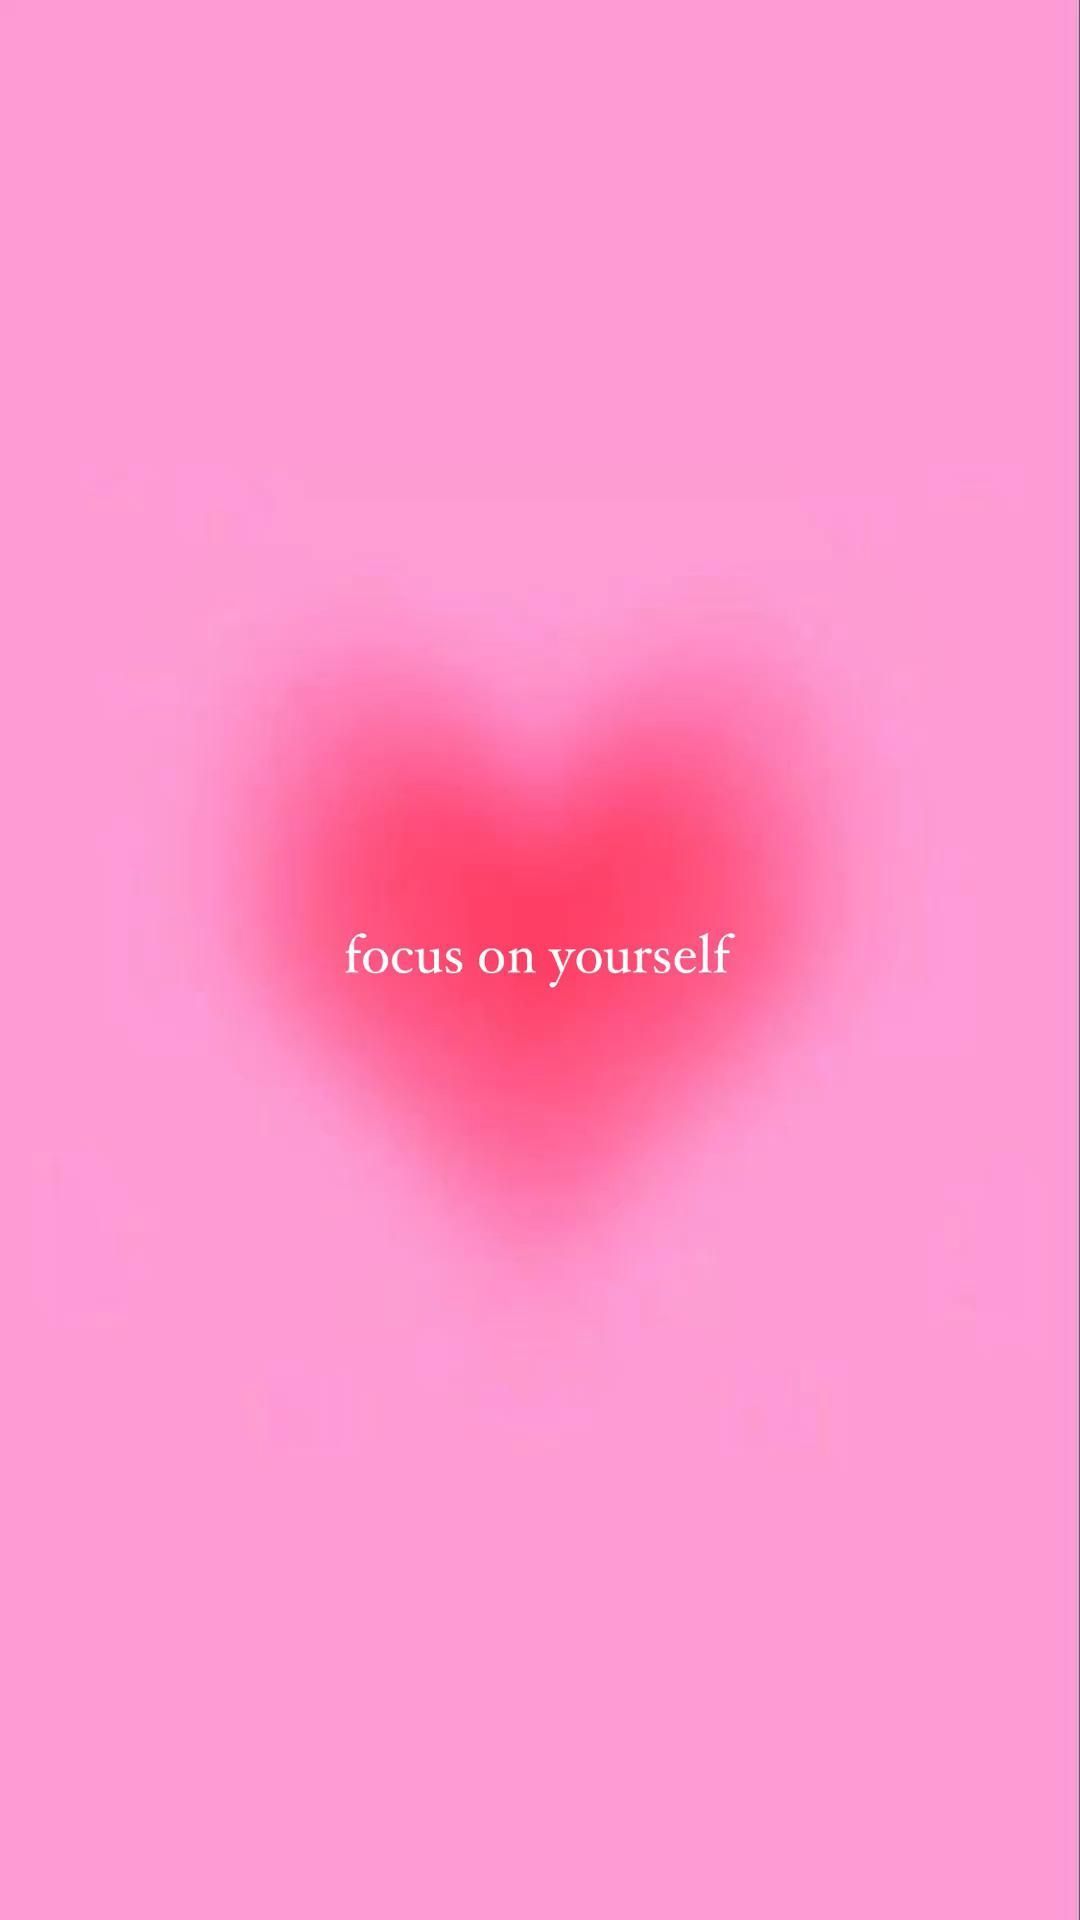 Focus On Yourself Wallpapers - Top Free Focus On Yourself Backgrounds ...